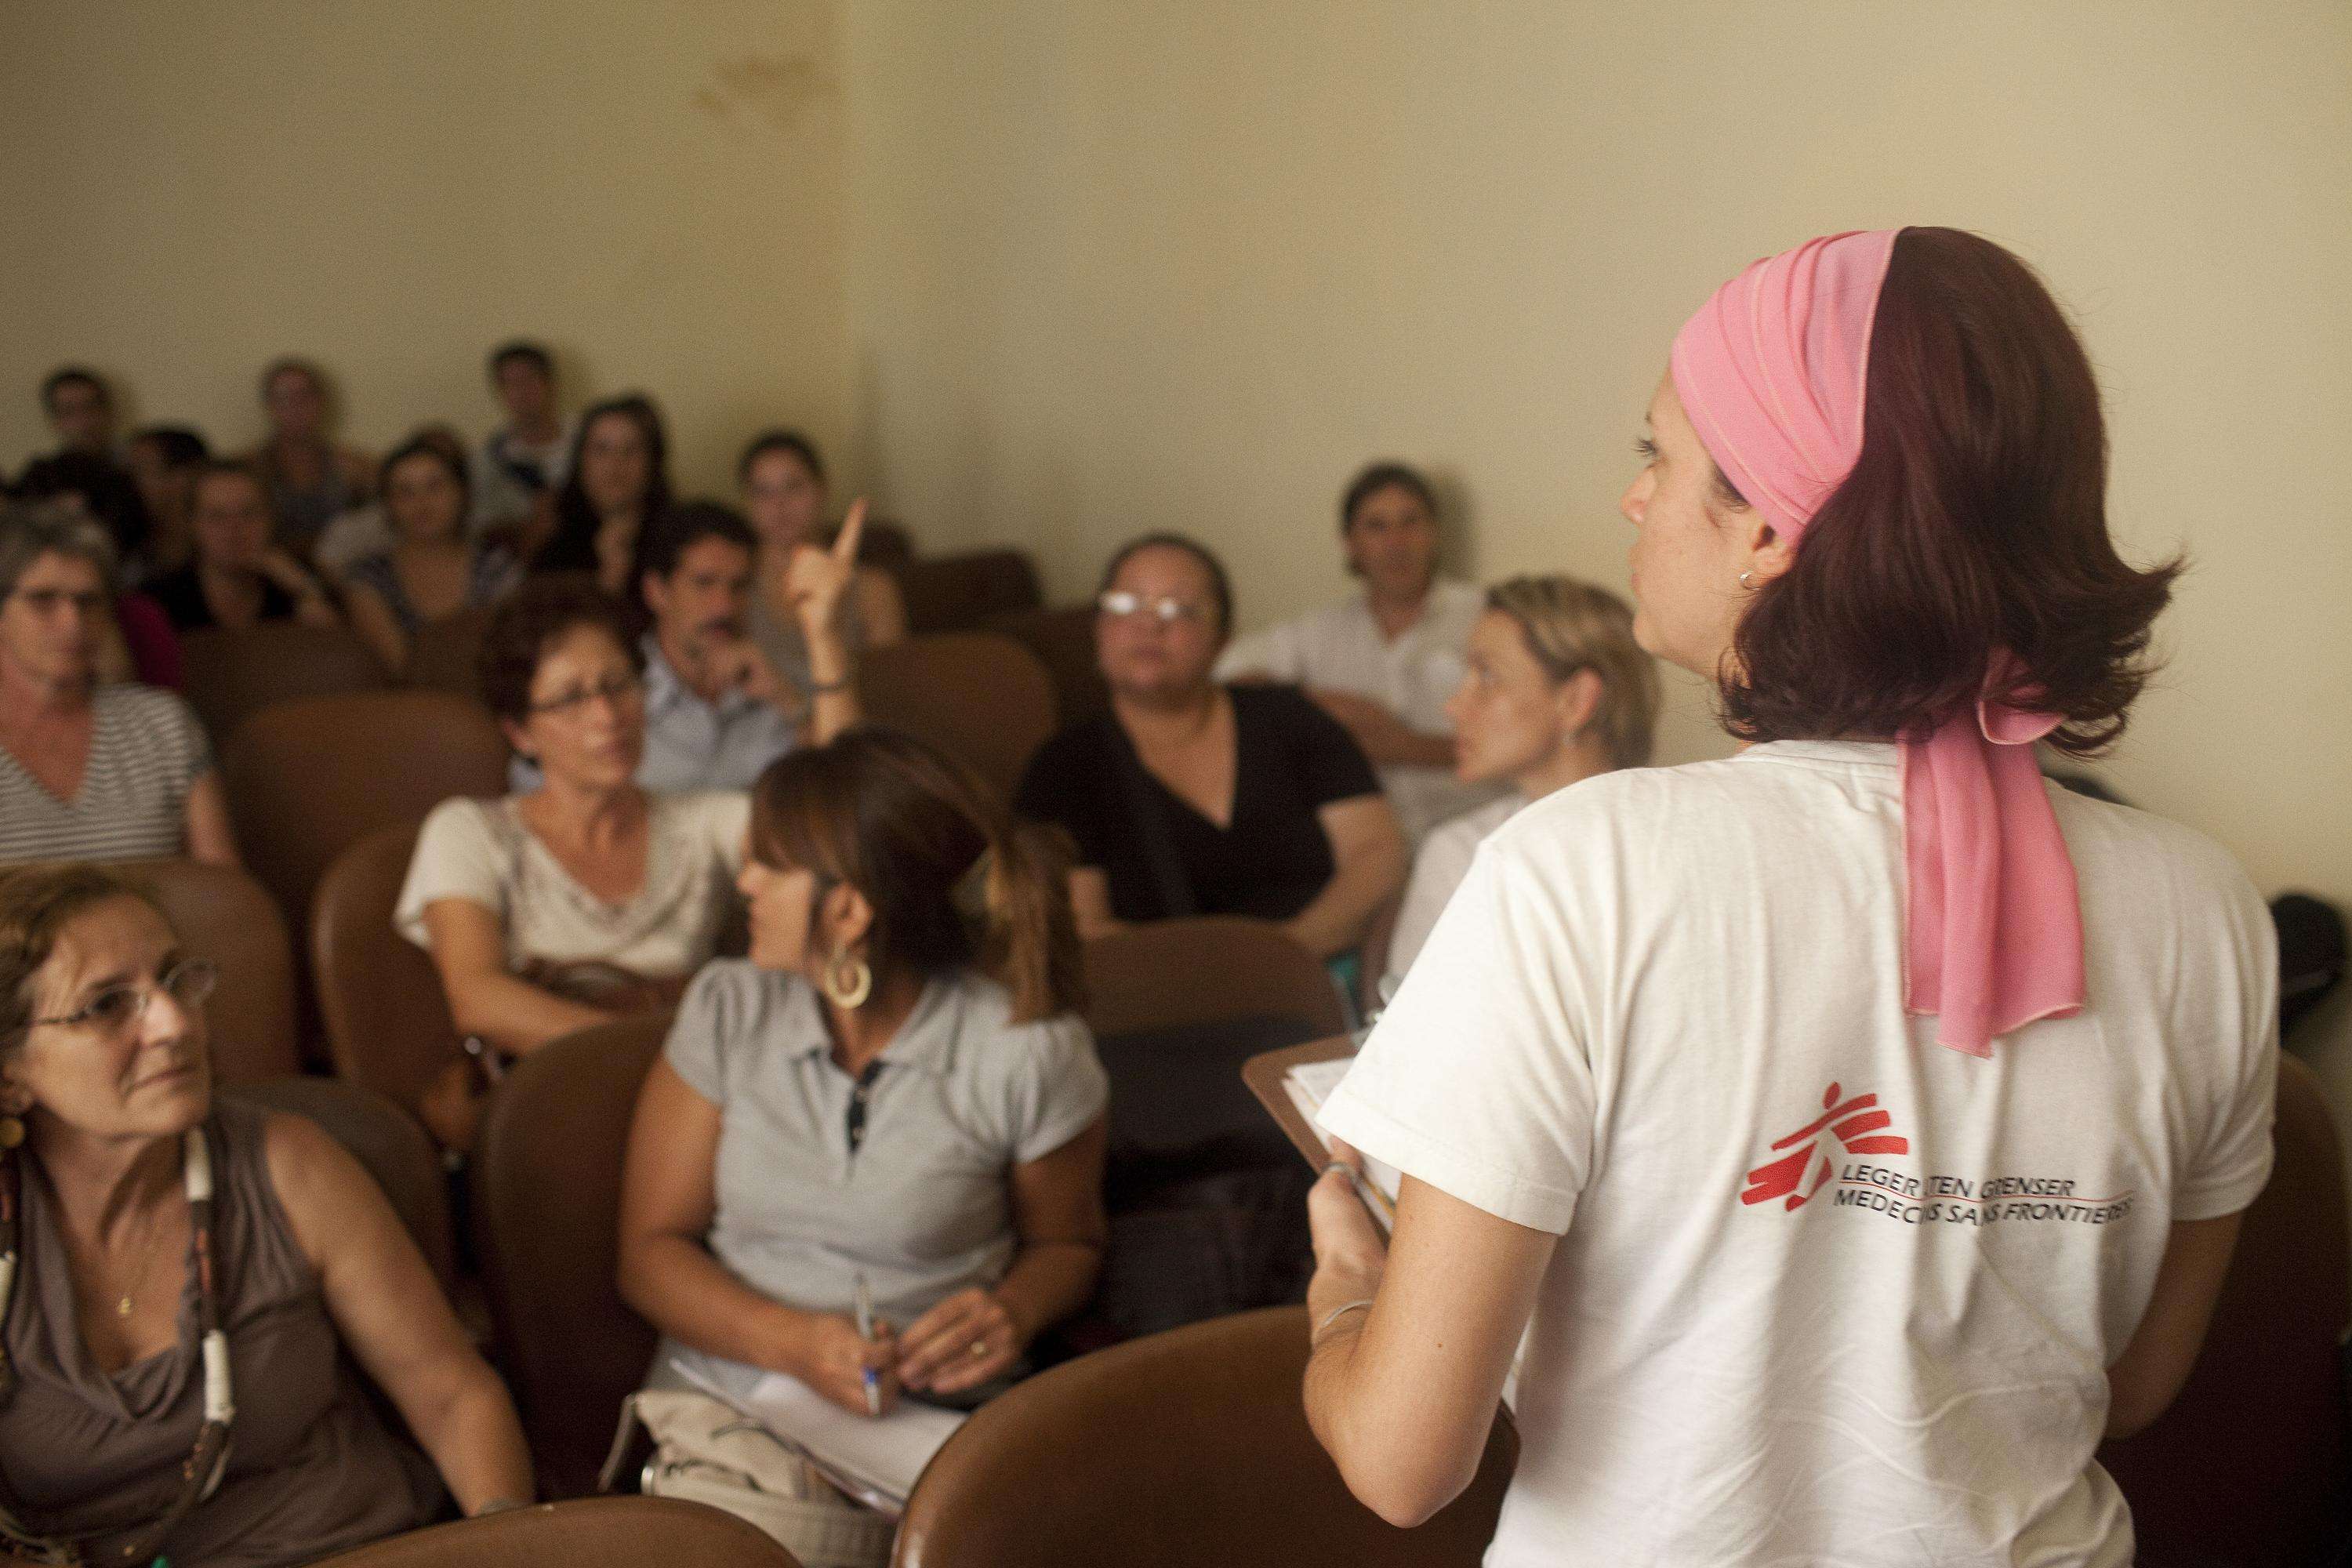 An MSF psychologist trains a group of local psychologists in Nova Friburgo, Rio de Janeiro